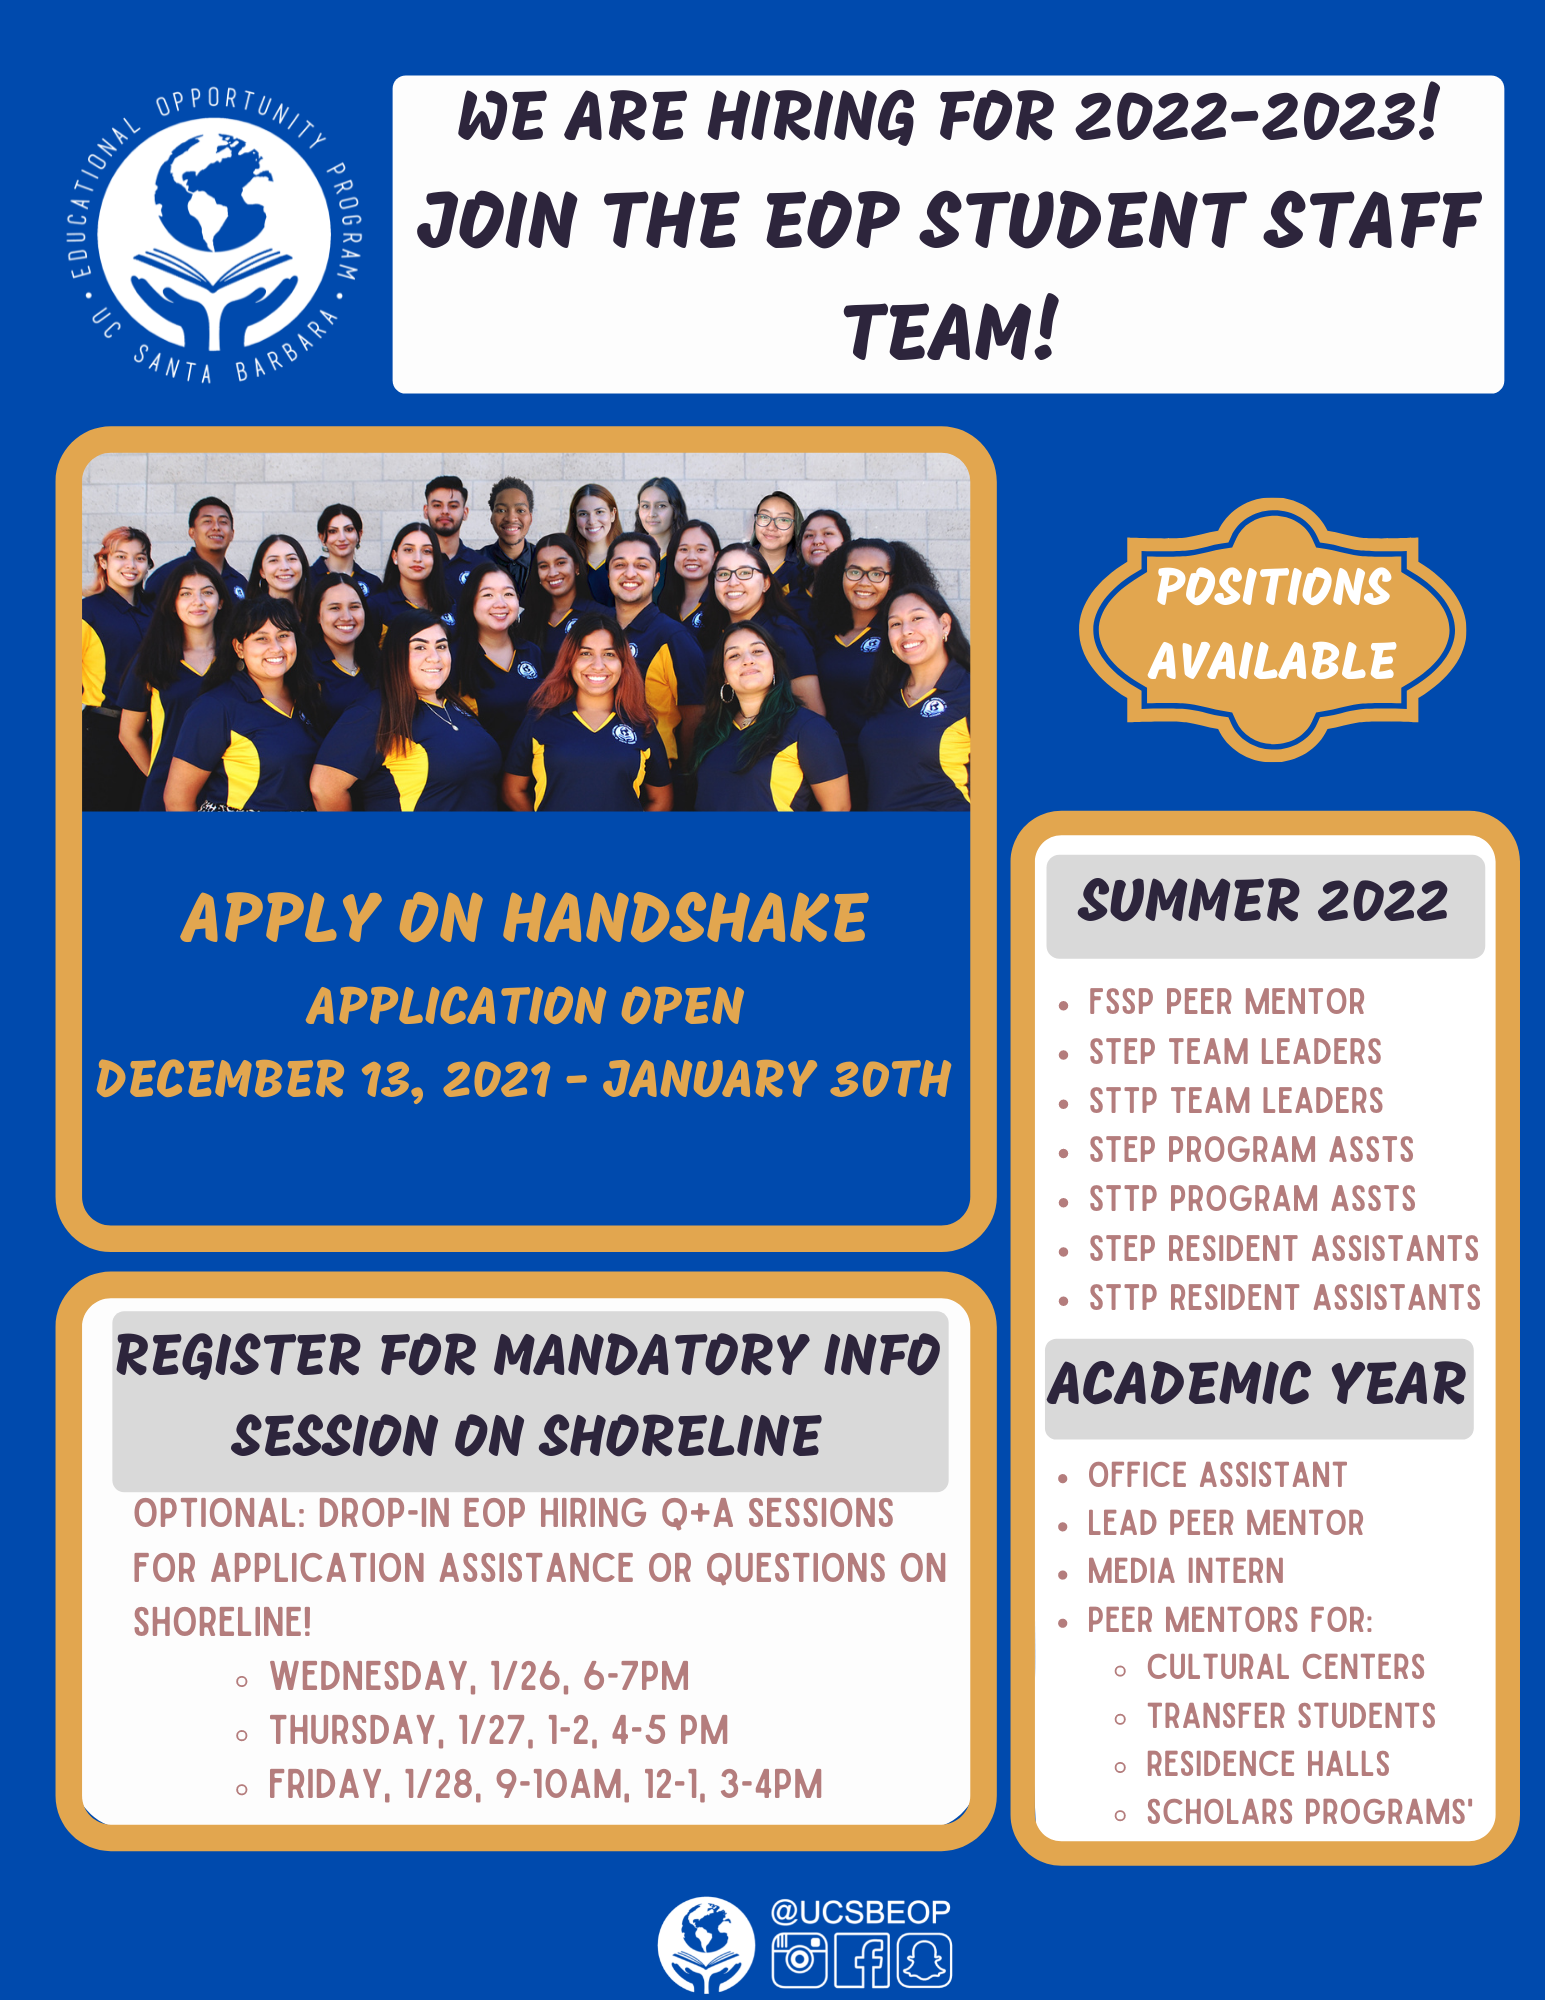 EOP is hiring for the student staff team for 2022-2023!